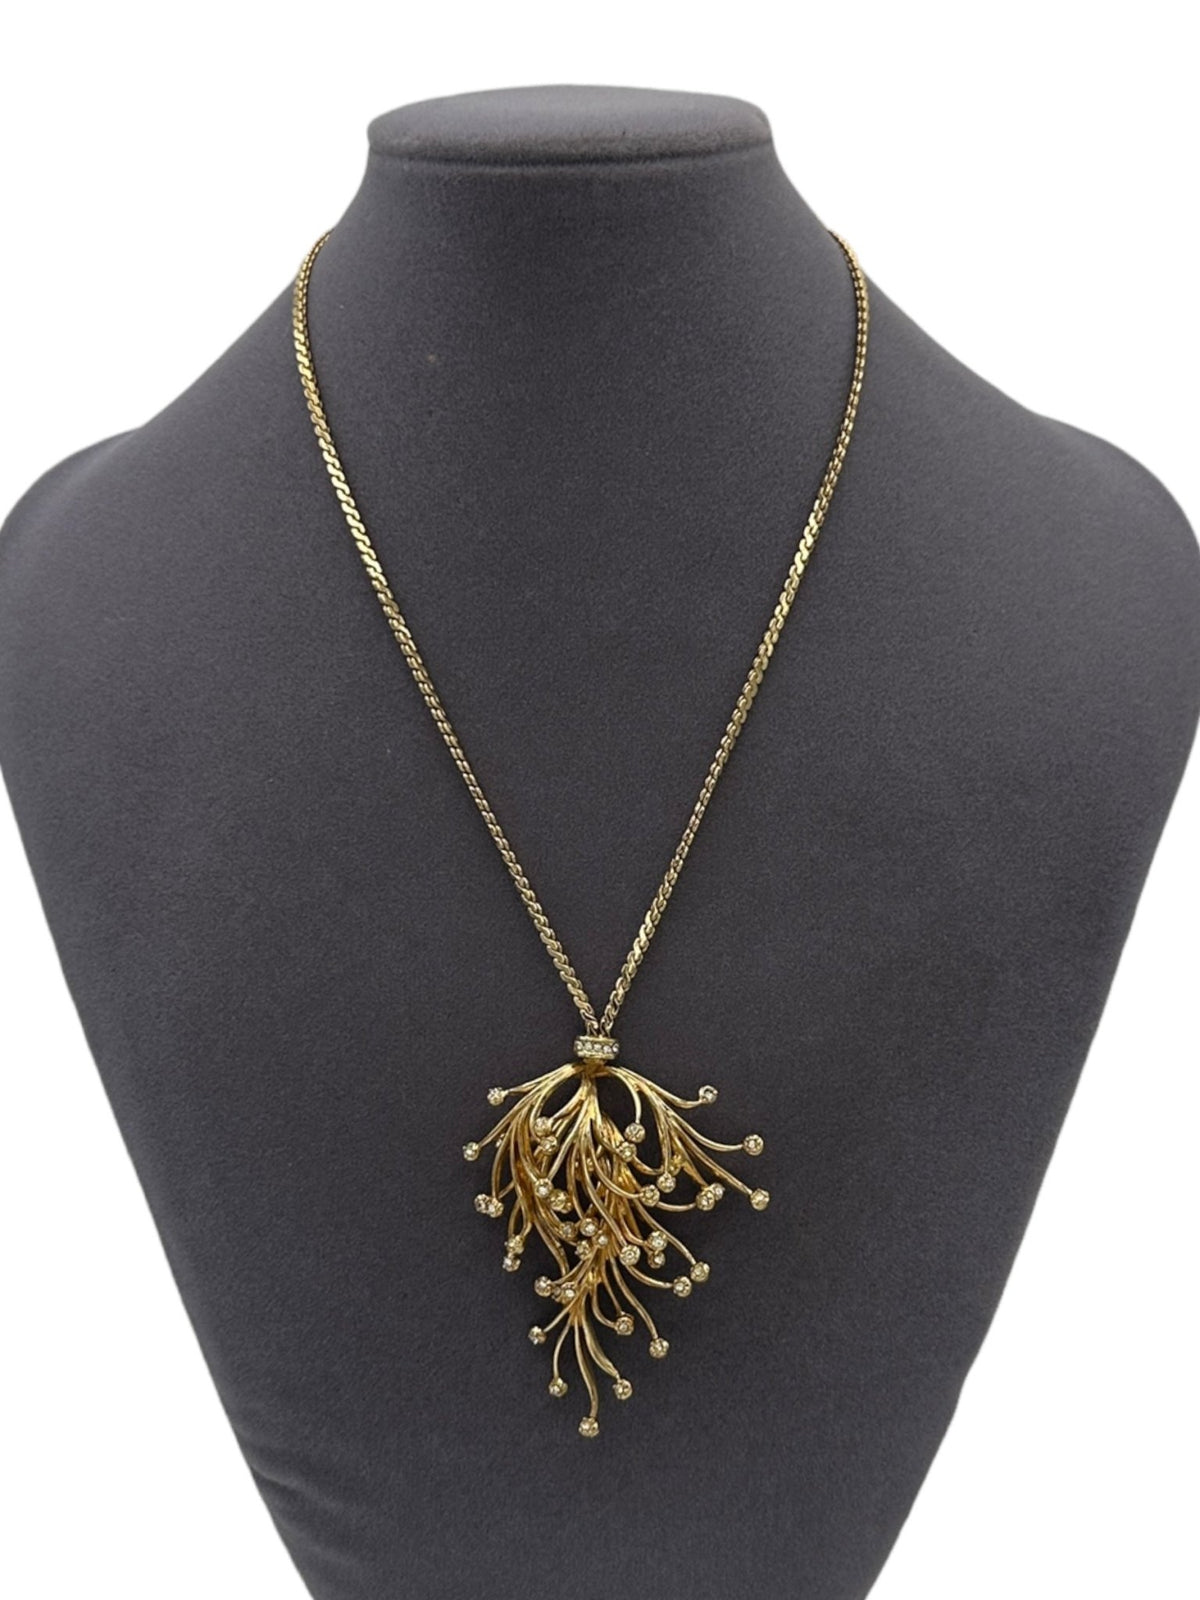 Grosse Gold Vintage Necklace Floral Waterfall Rhinestone Pendant - 24 Wishes Vintage Jewelry